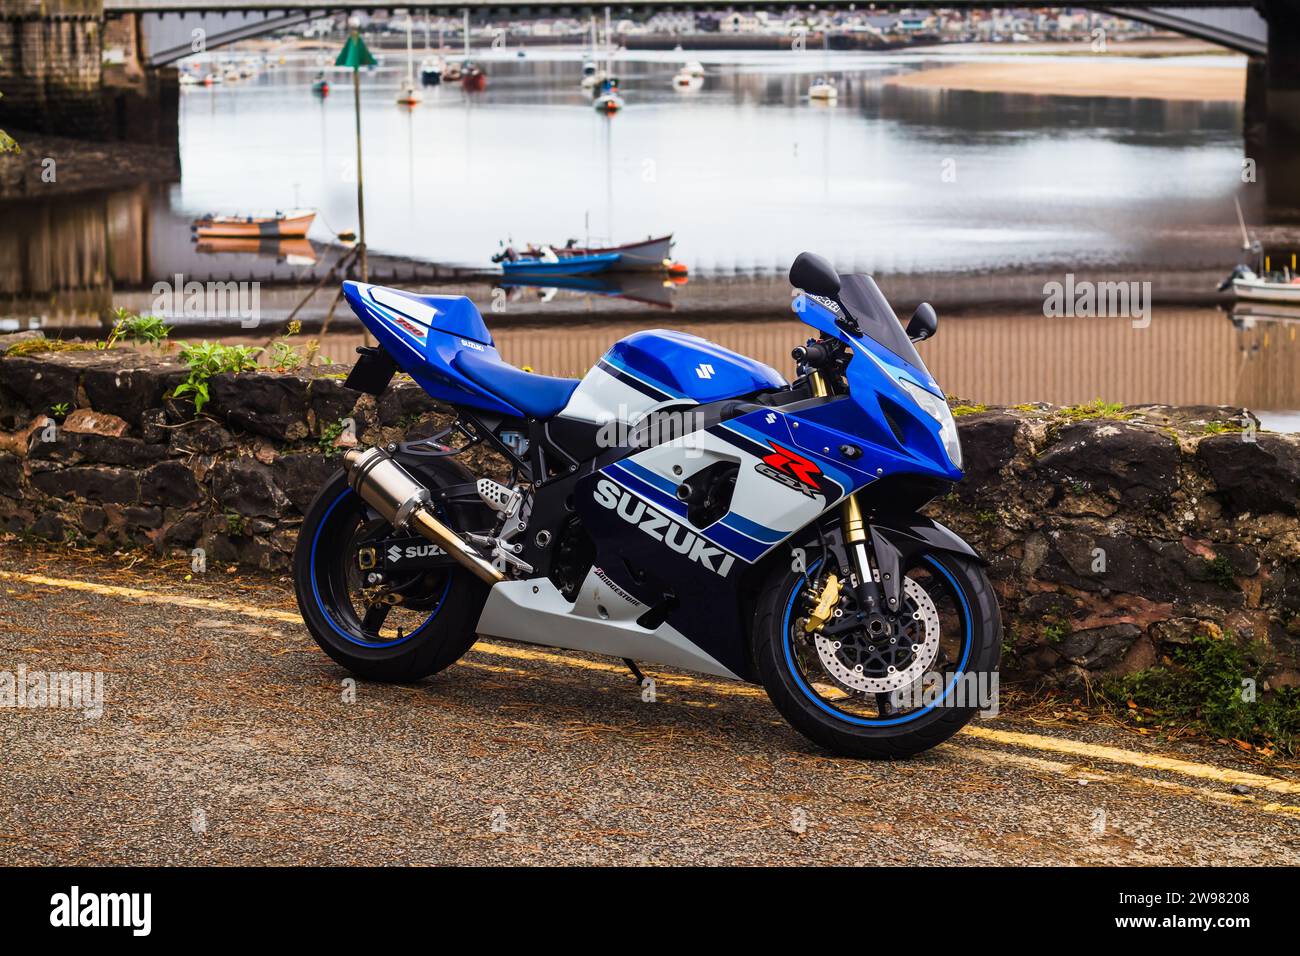 A close-up of a Suzuki motorcycle parked against a backdrop of mountains in Conwy, Wales Stock Photo